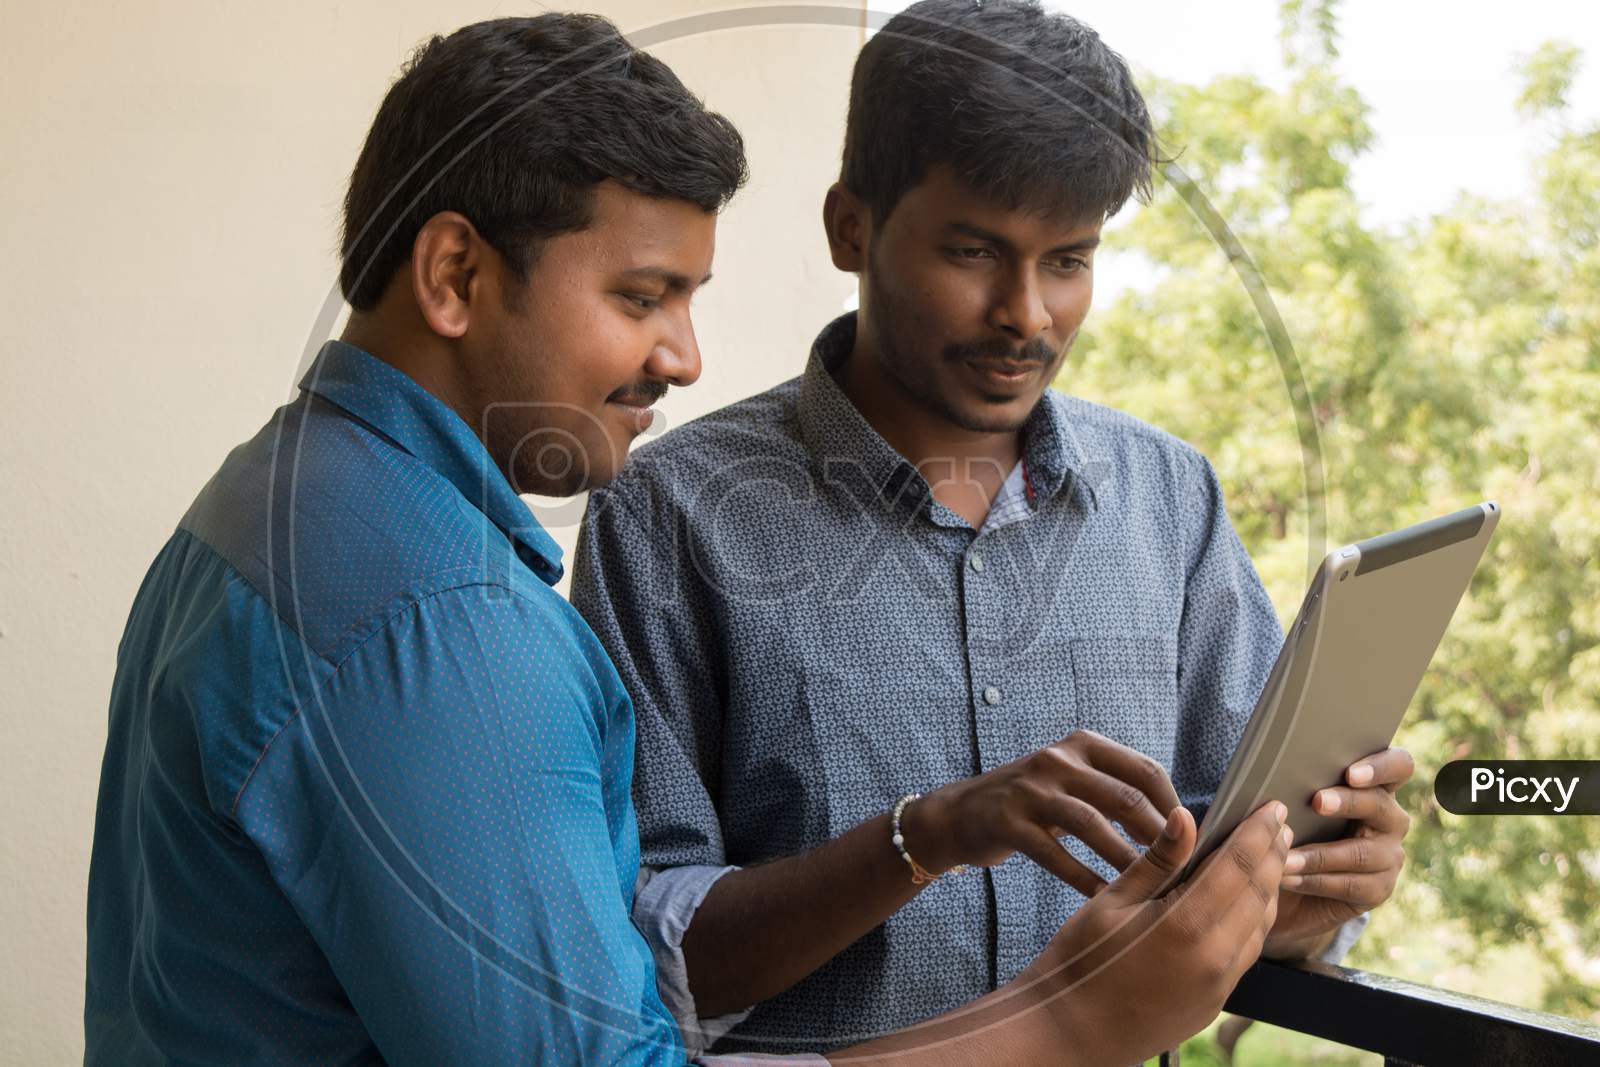 A Couple Of Young Indian Men's Using Tablet Gadget or iPad